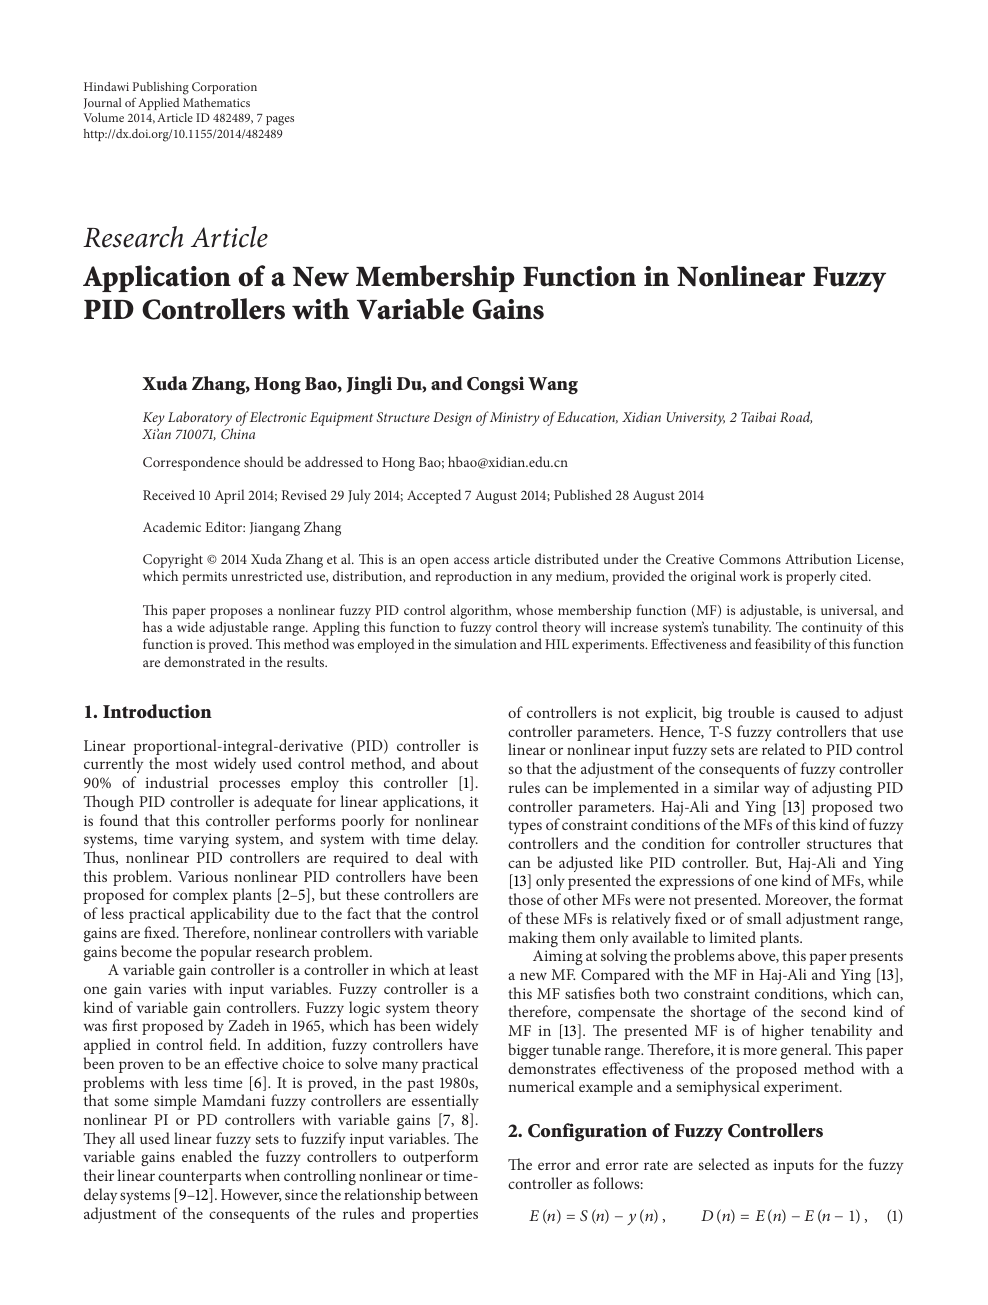 Application Of A New Membership Function In Nonlinear Fuzzy Pid Controllers With Variable Gains Topic Of Research Paper In Mathematics Download Scholarly Article Pdf And Read For Free On Cyberleninka Open